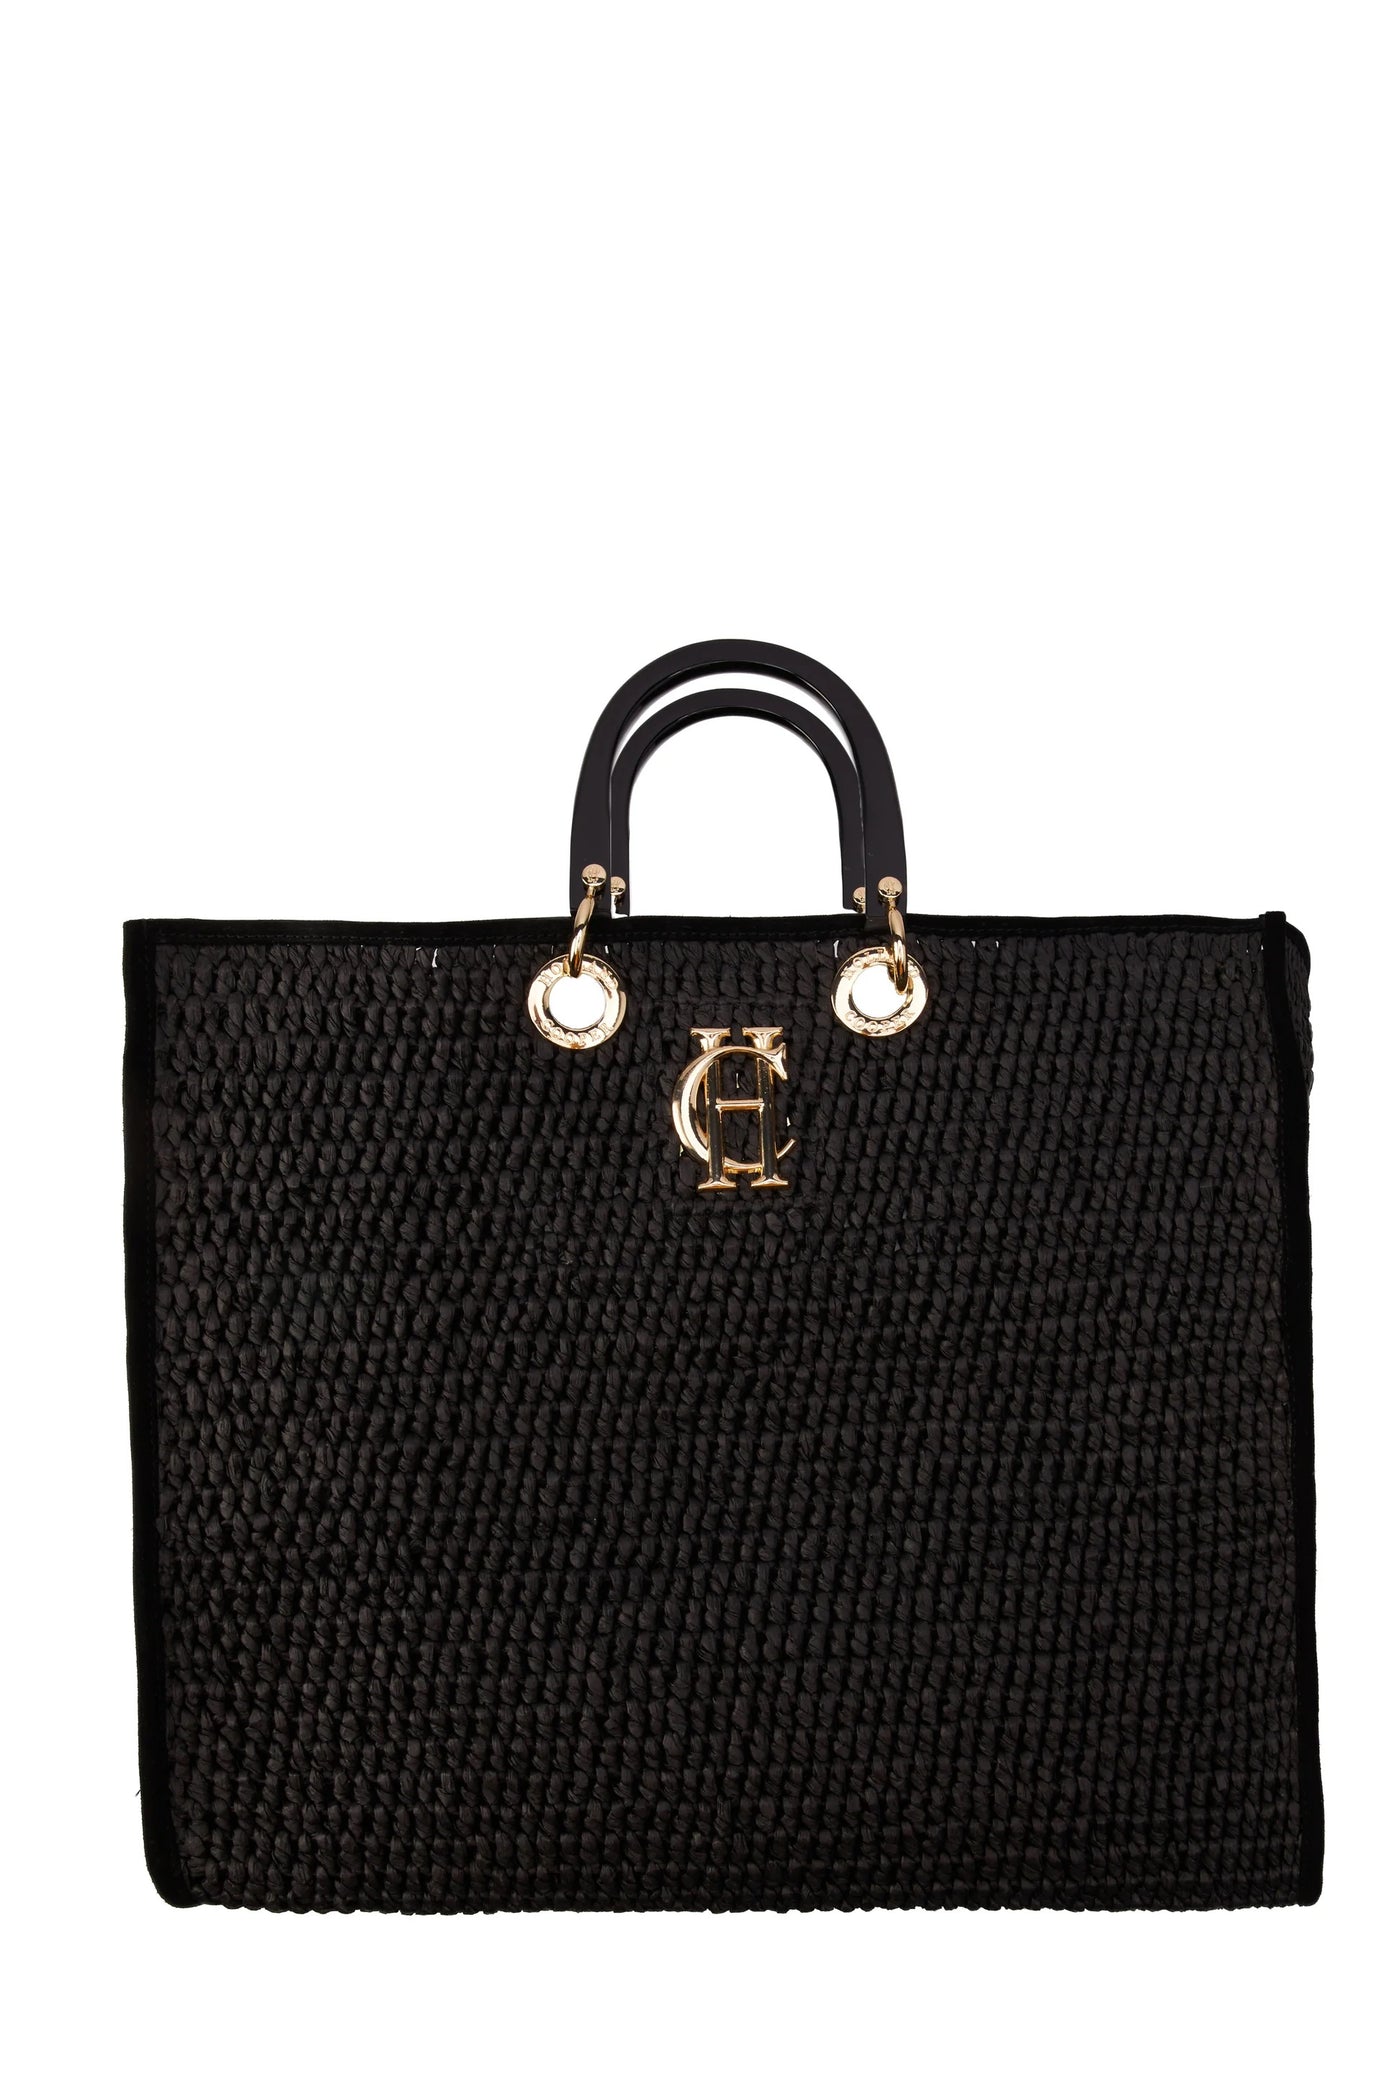 Holland Cooper Riviera Tote Bag in Black Front